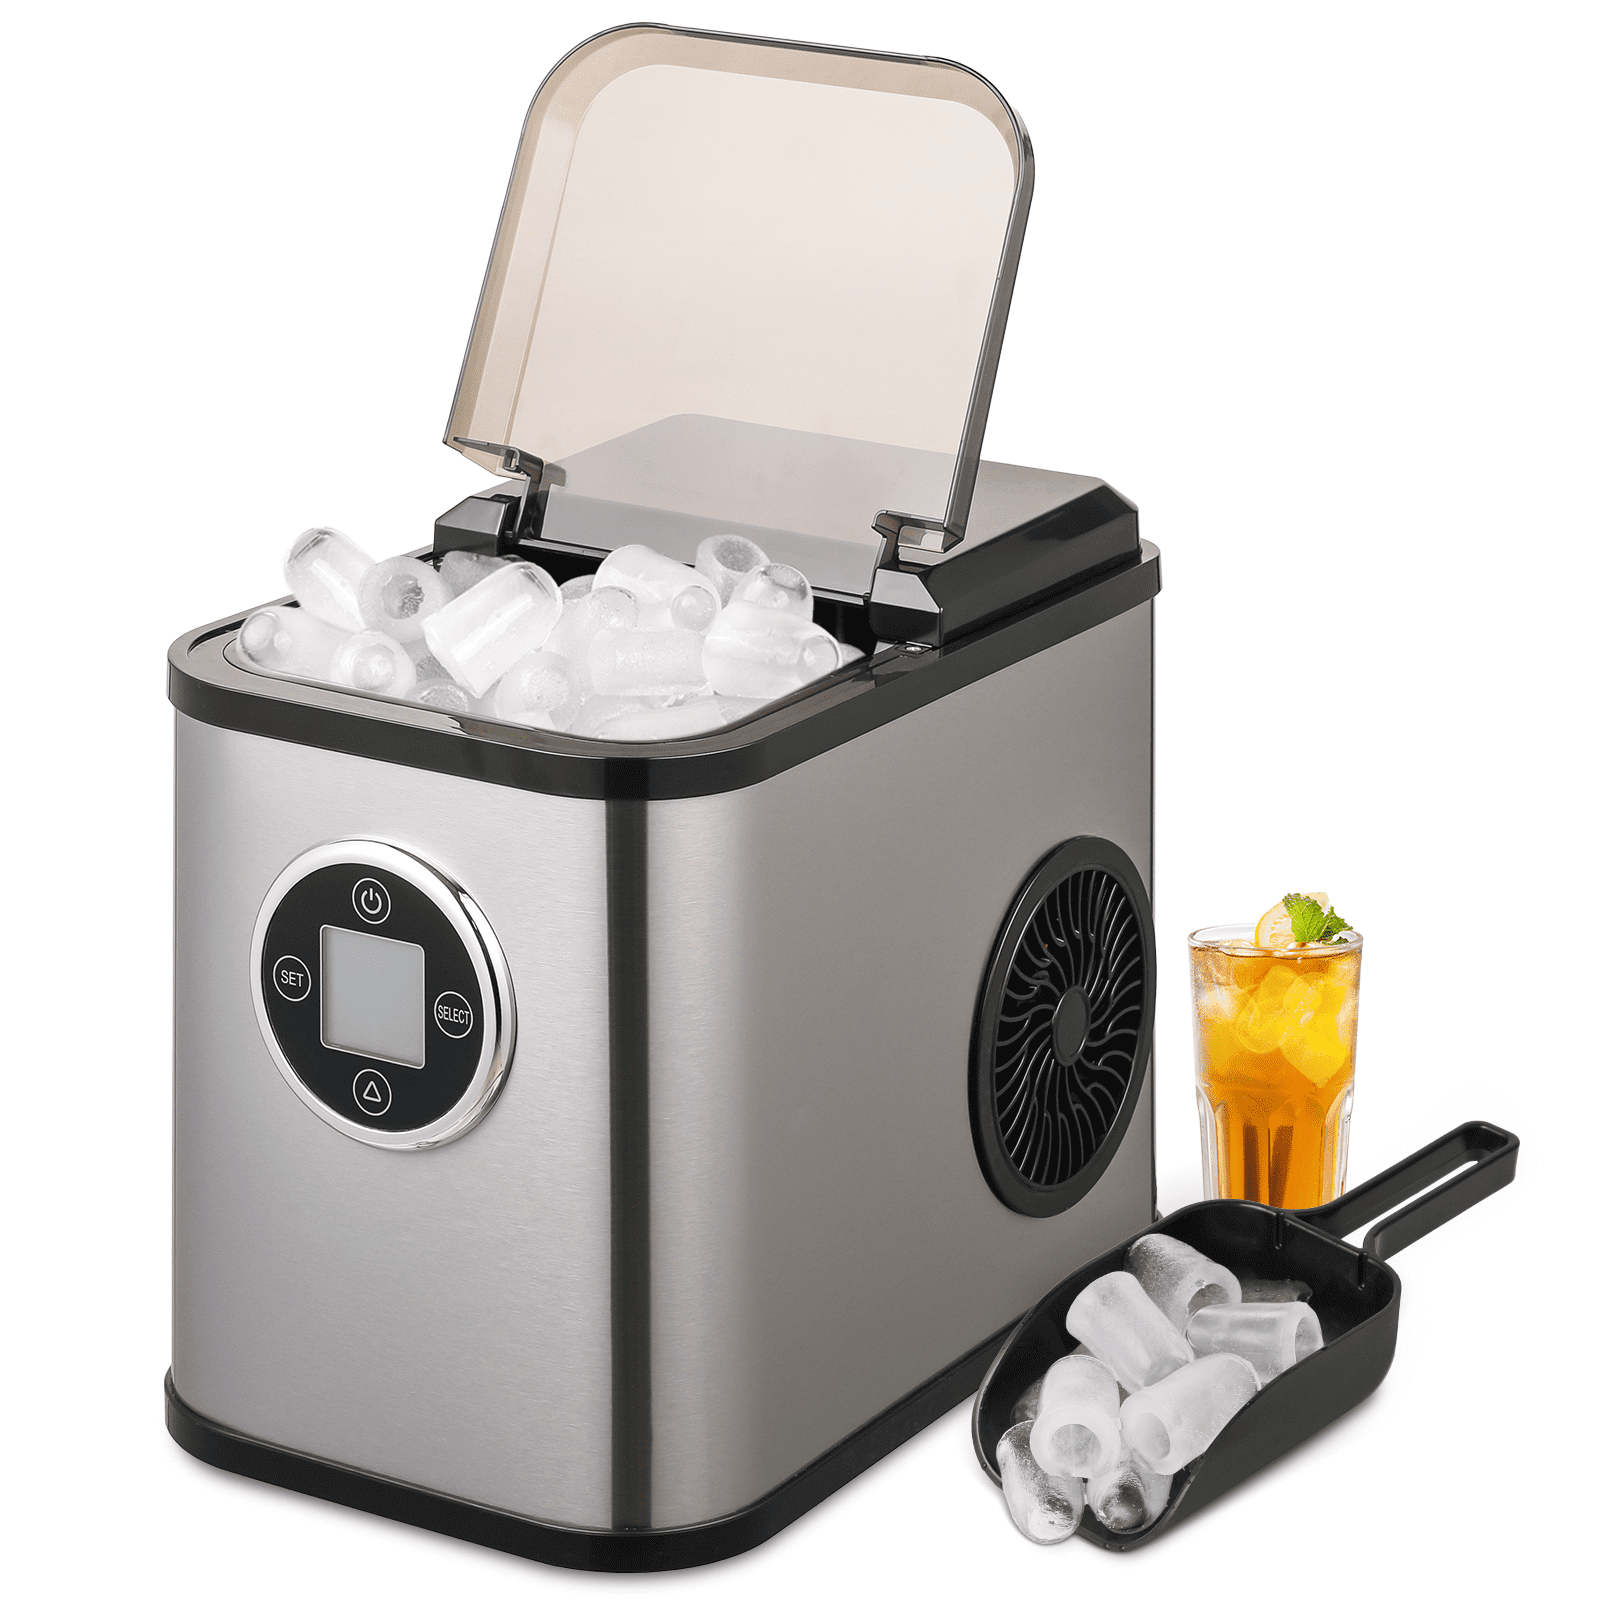  Zvoutte Portable Countertop Ice Maker Machine - Self-Cleaning Ice  Makers with Ice Scoop and Basket, 9 Cubes in 8-10 mins, 26 lbs/24 Hours,  for Home/Kitchen/Bar/Office/Camping (Black) : Appliances